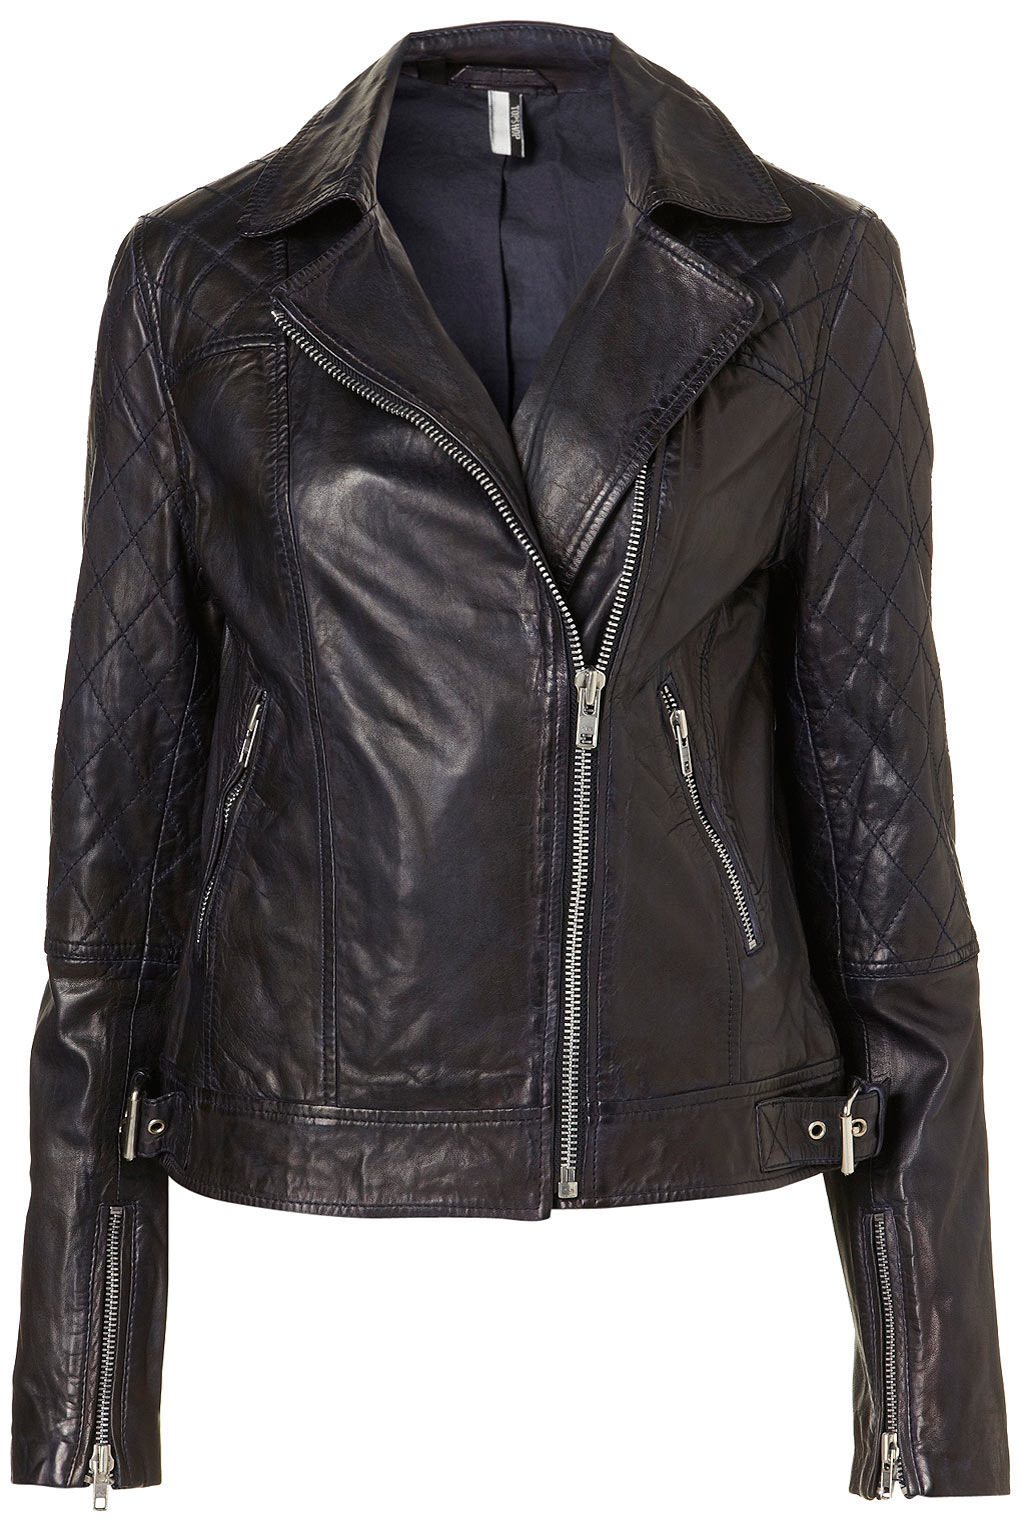 Lyst - Topshop Quilted Leather Biker Jacket in Black